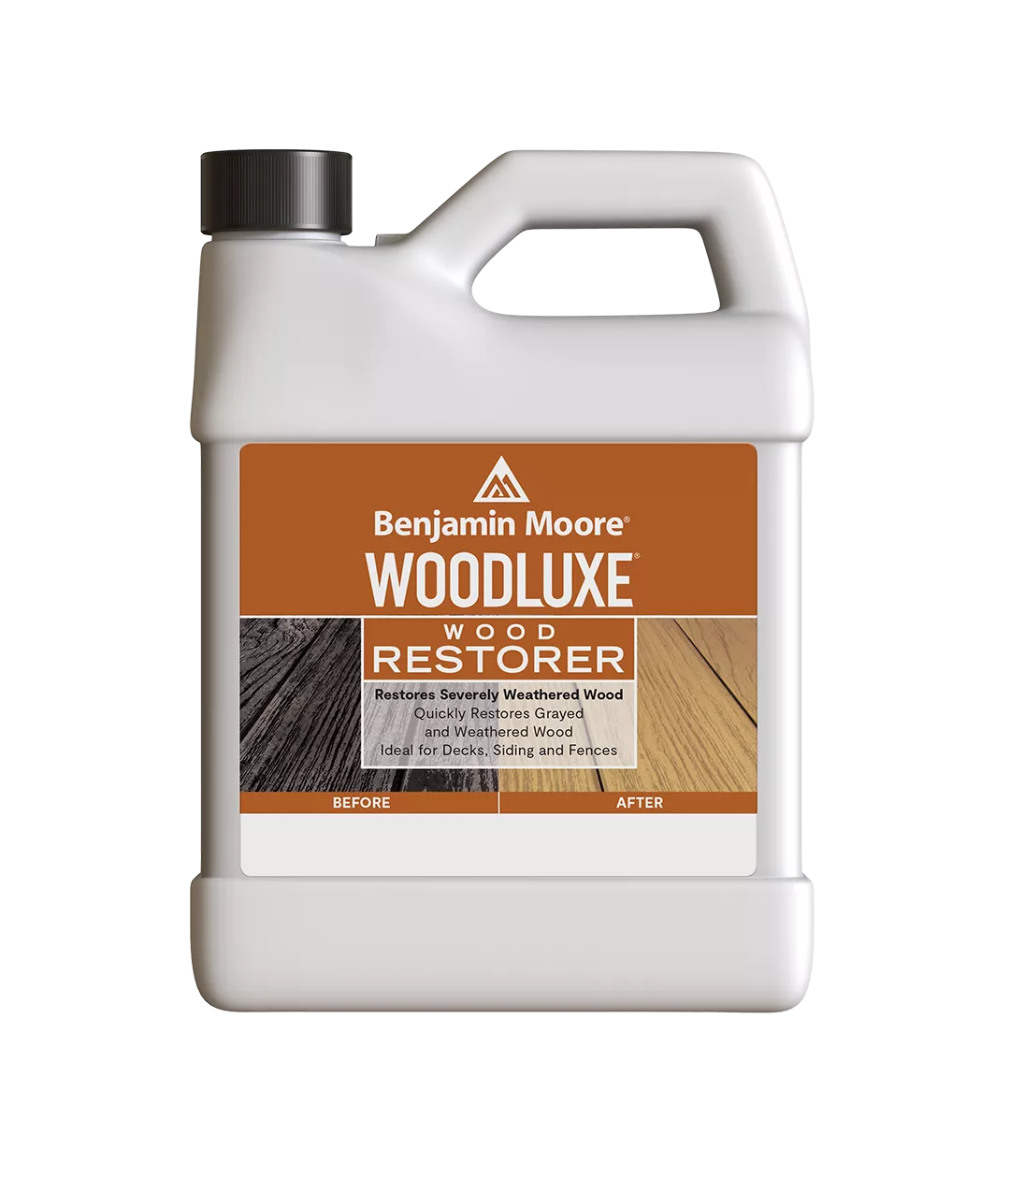 Benjamin Moore Woodluxe Wood Restorer Gallon available at Clement's Paint in Austin, Texas.